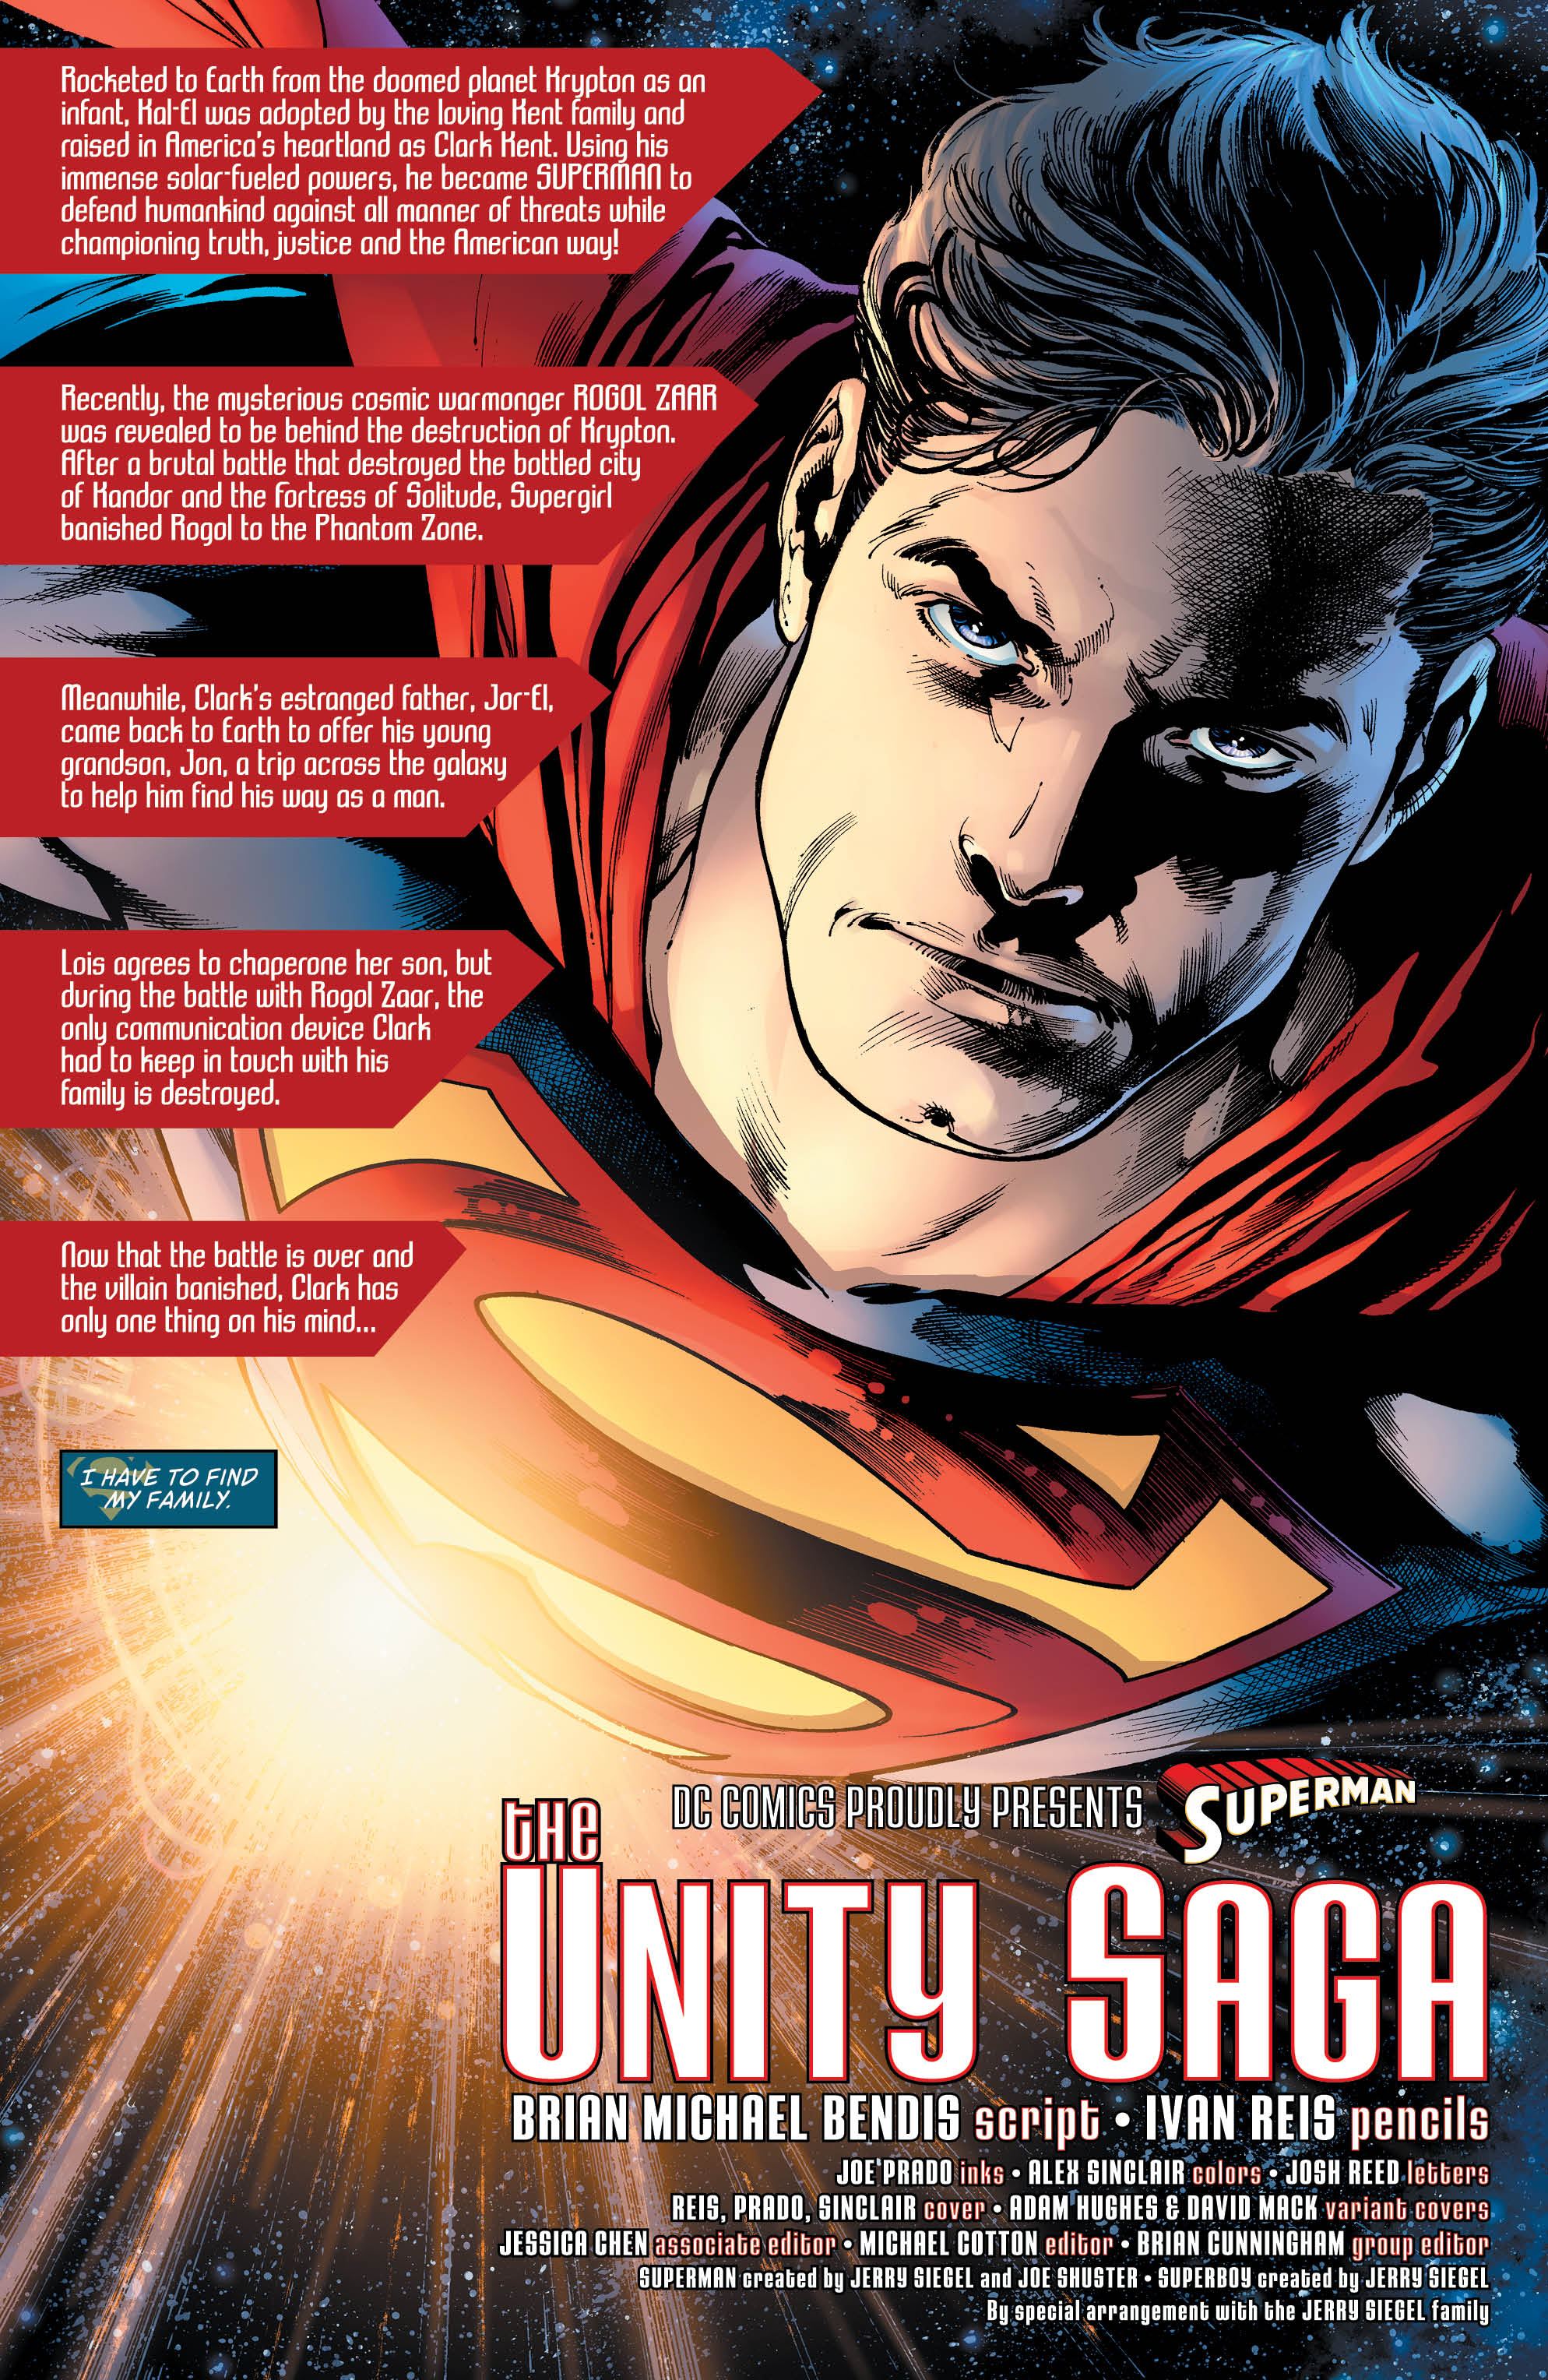 THE MAN OF STEEL BY BRIAN MICHAEL BENDIS | DC